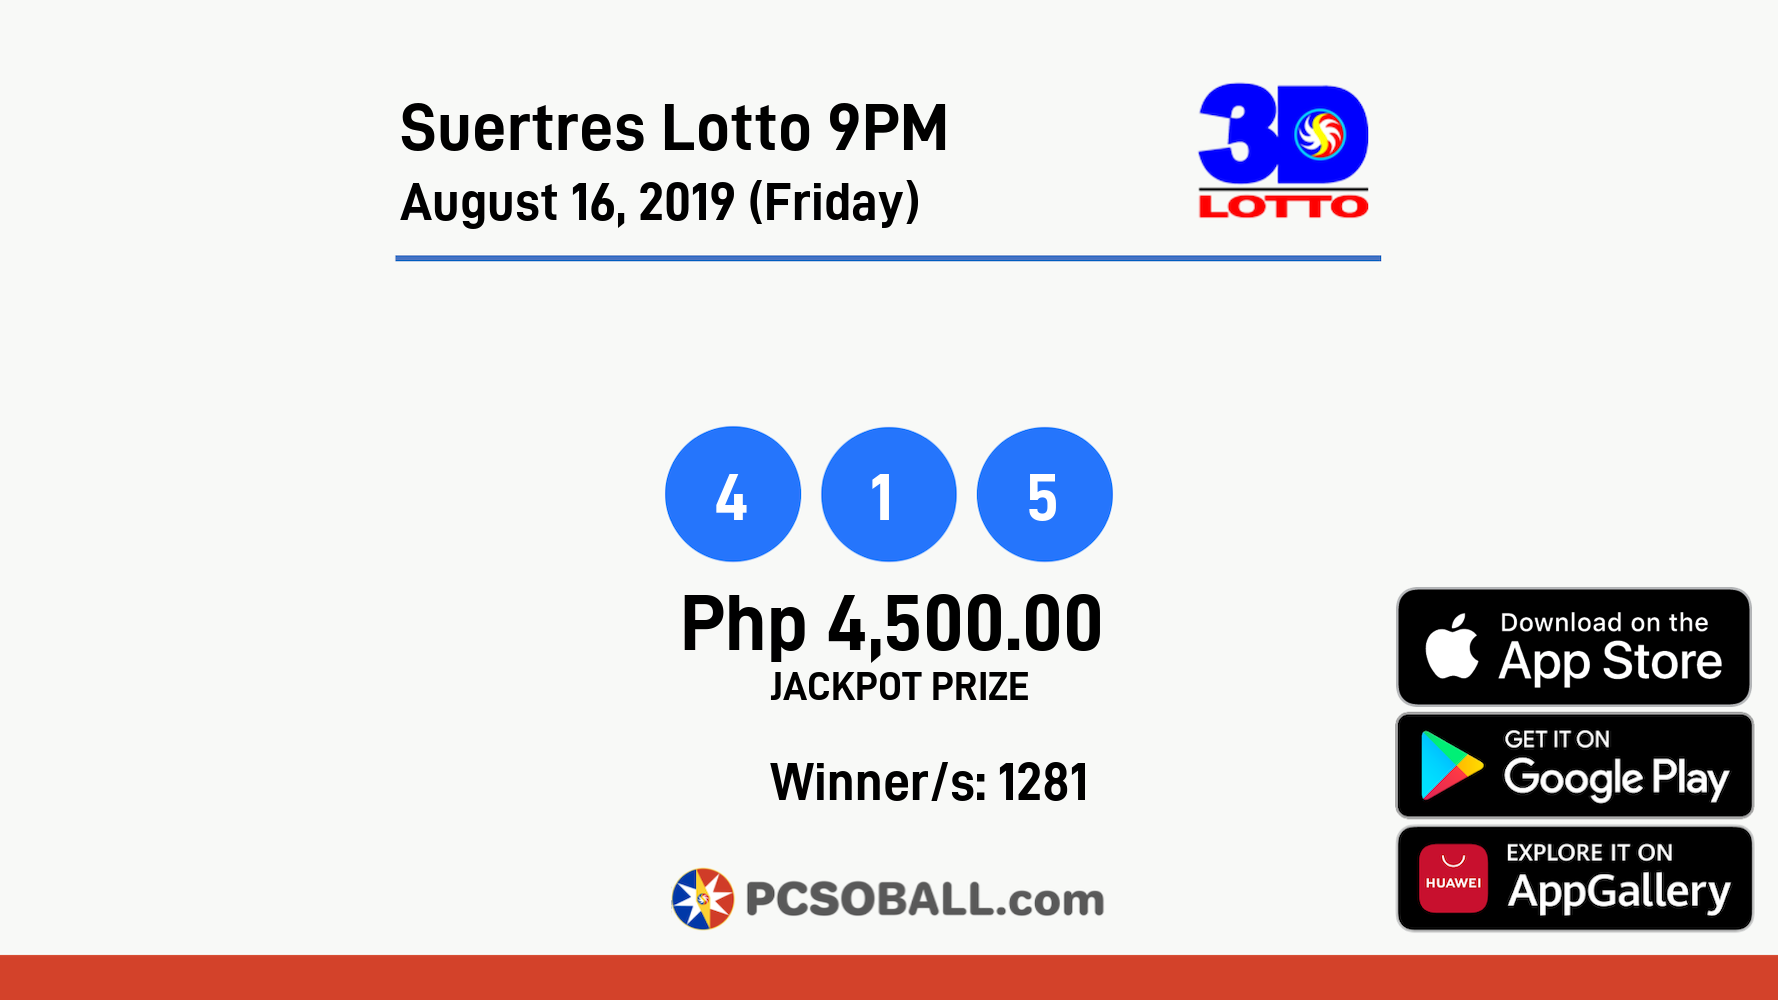 Suertres Lotto 9PM August 16, 2019 (Friday) Result